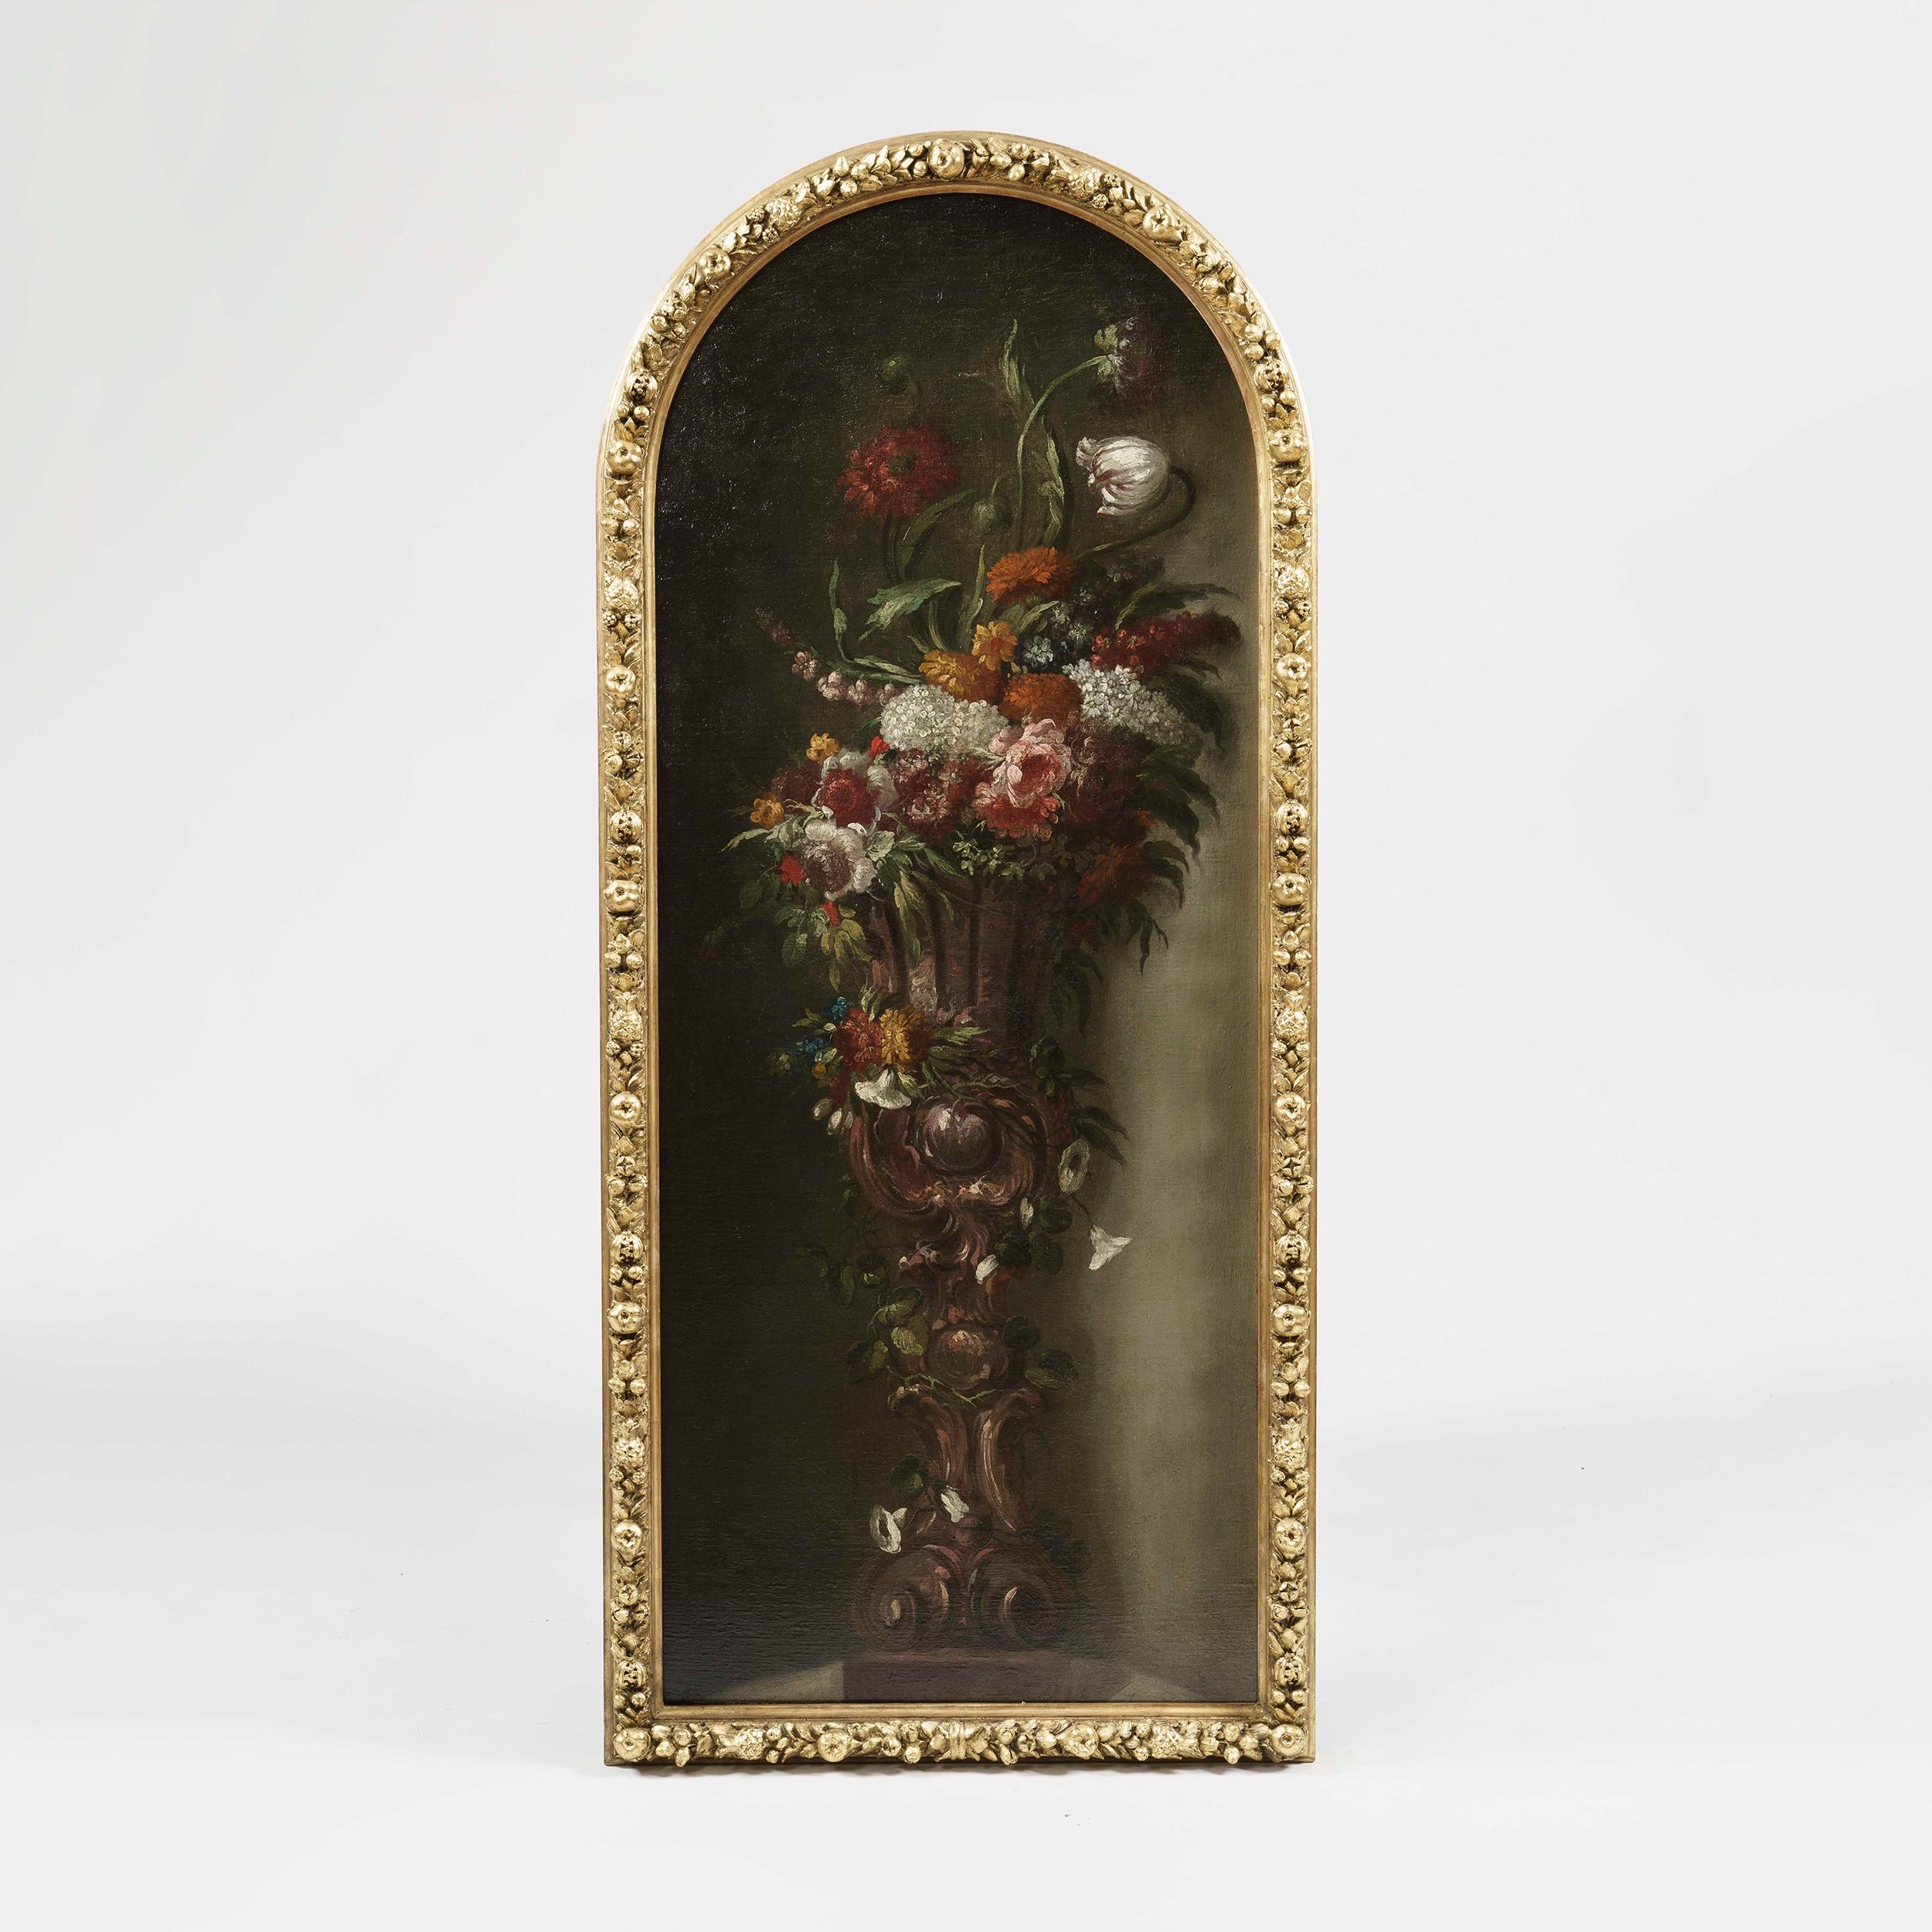 A pair of still-life paintings

The large scenes executed in oil depicting large flower bouquets of tulips, carnations, peonies and morning glories in illusionistic alcoves. Housed in finely carved giltwood frames with arched tops.
Oil on